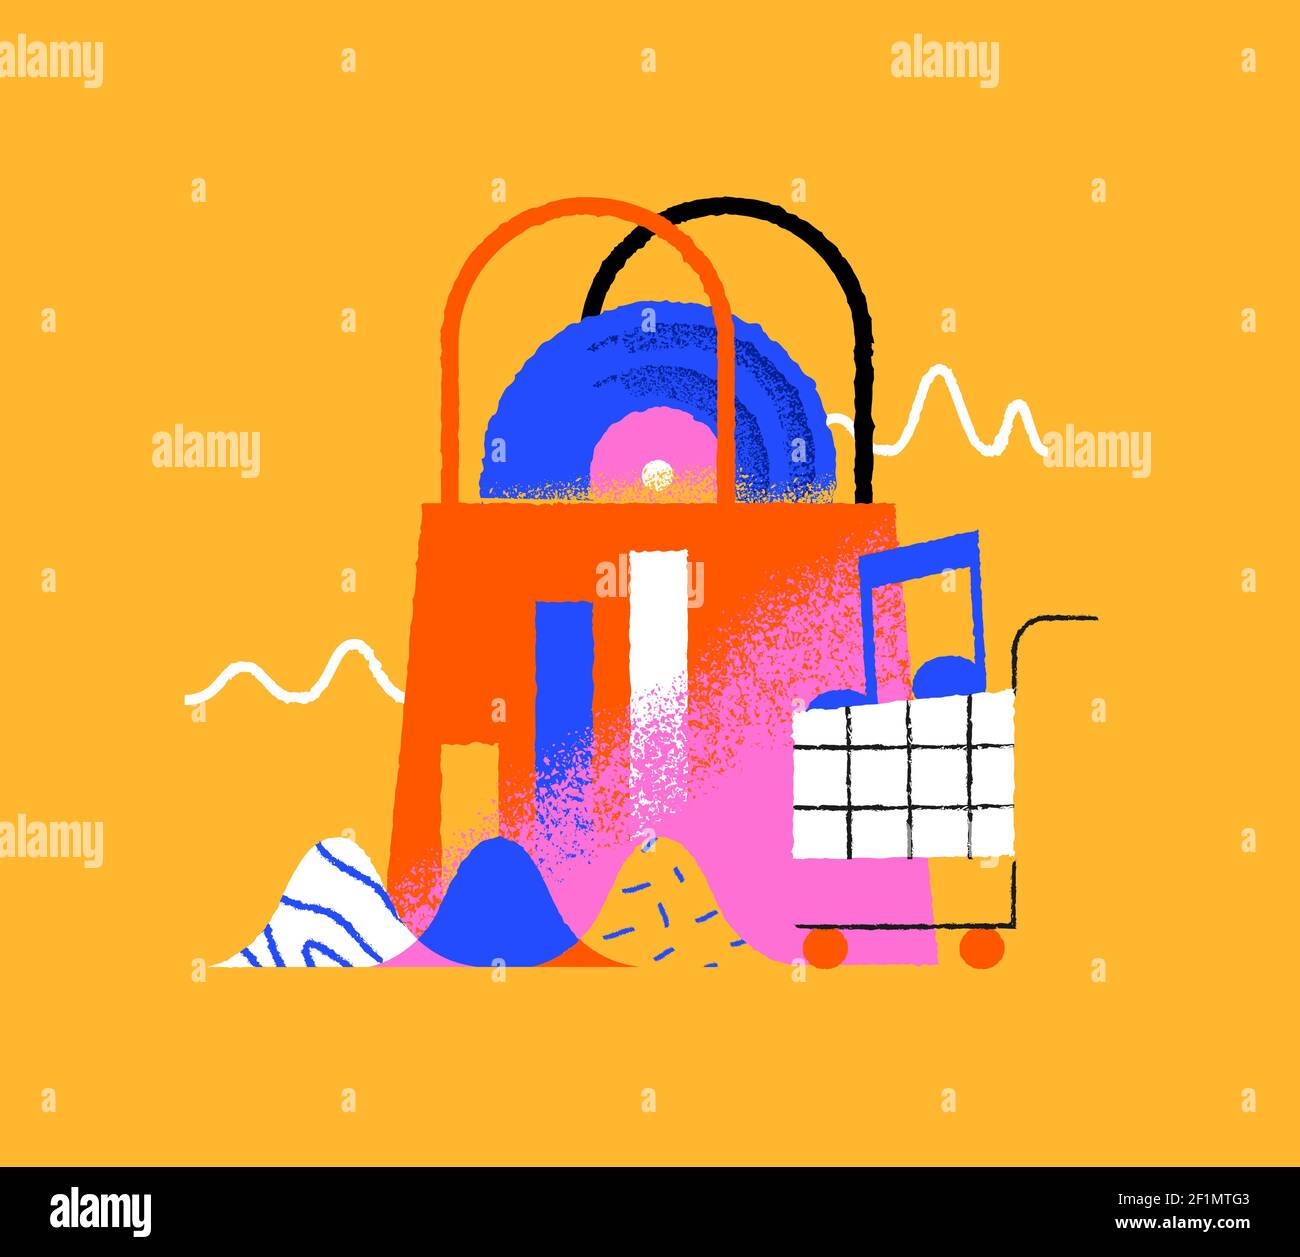 Music store colorful illustration of shopping bag, cart and vinyl cd on isolated background. Web business or online musical market concept in trendy h Stock Vector